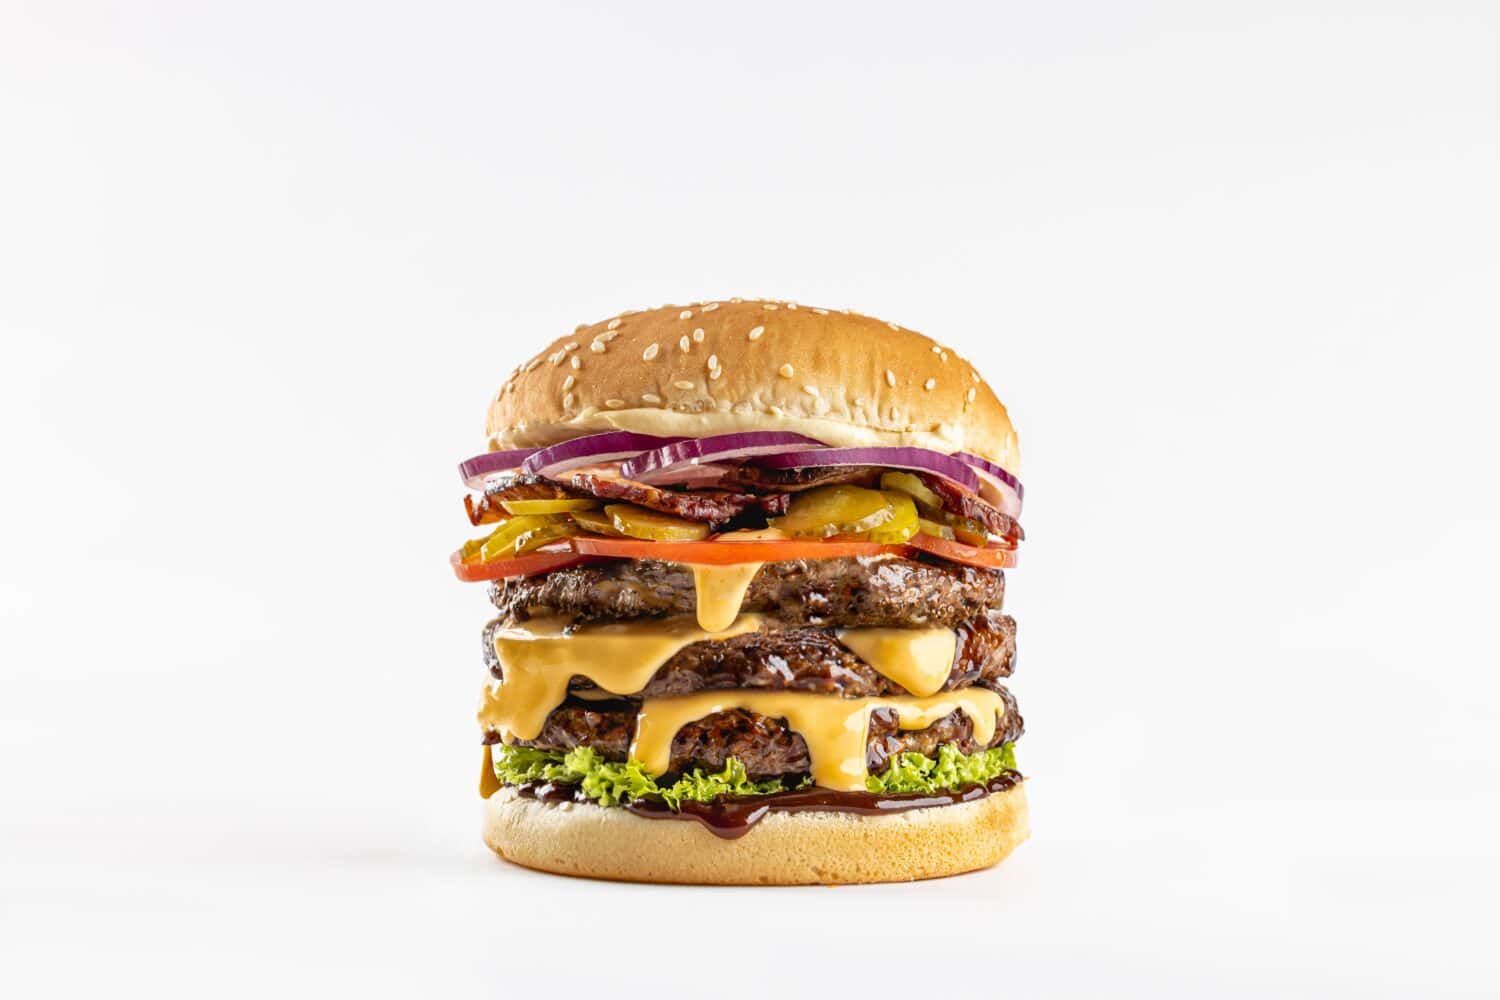 Huge burger with three levels on the white background